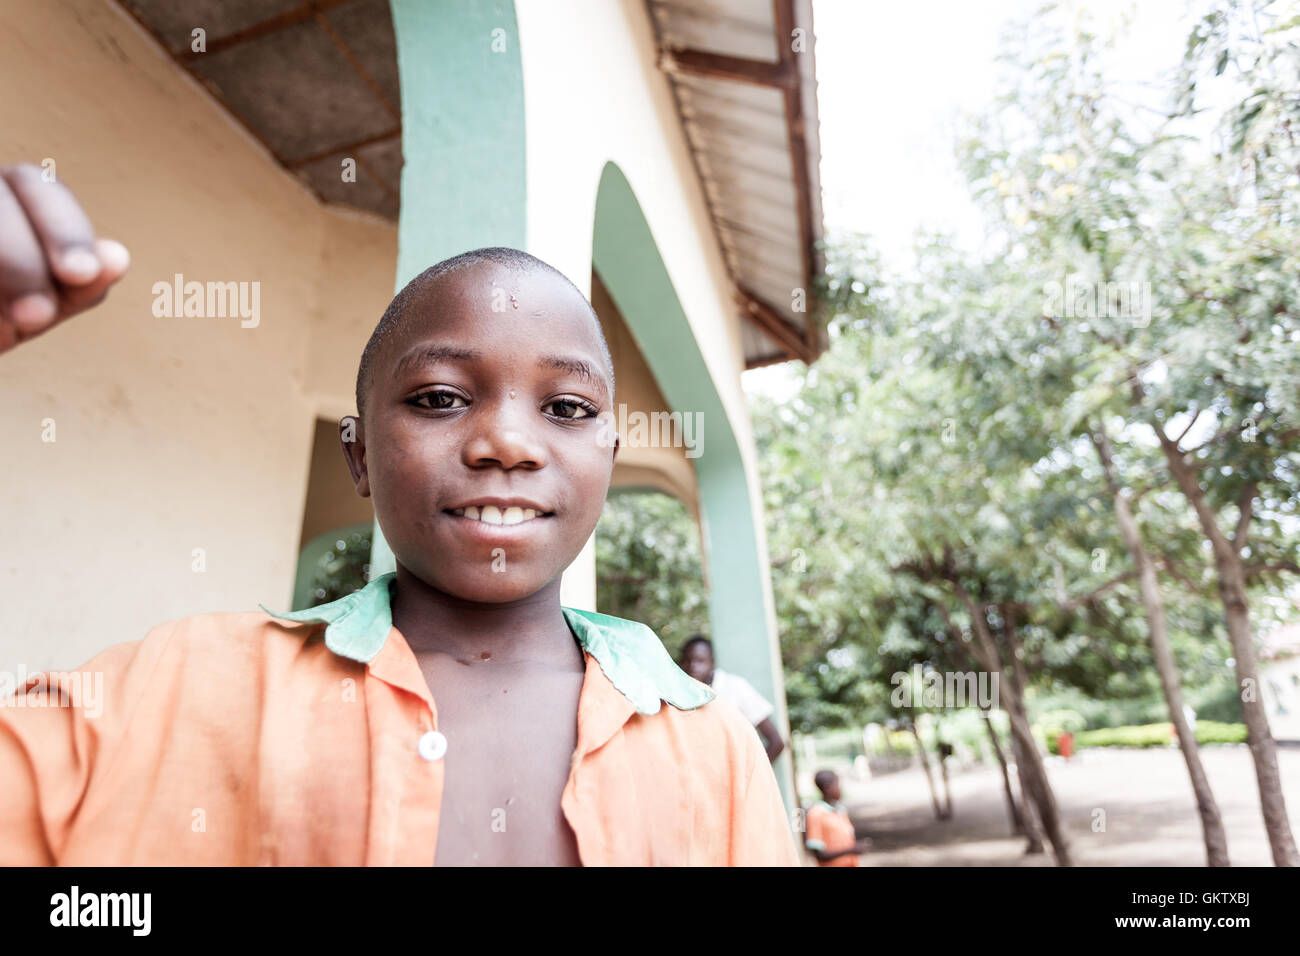 A young boy poses for the camera at a school in kasese, uganda Stock Photo